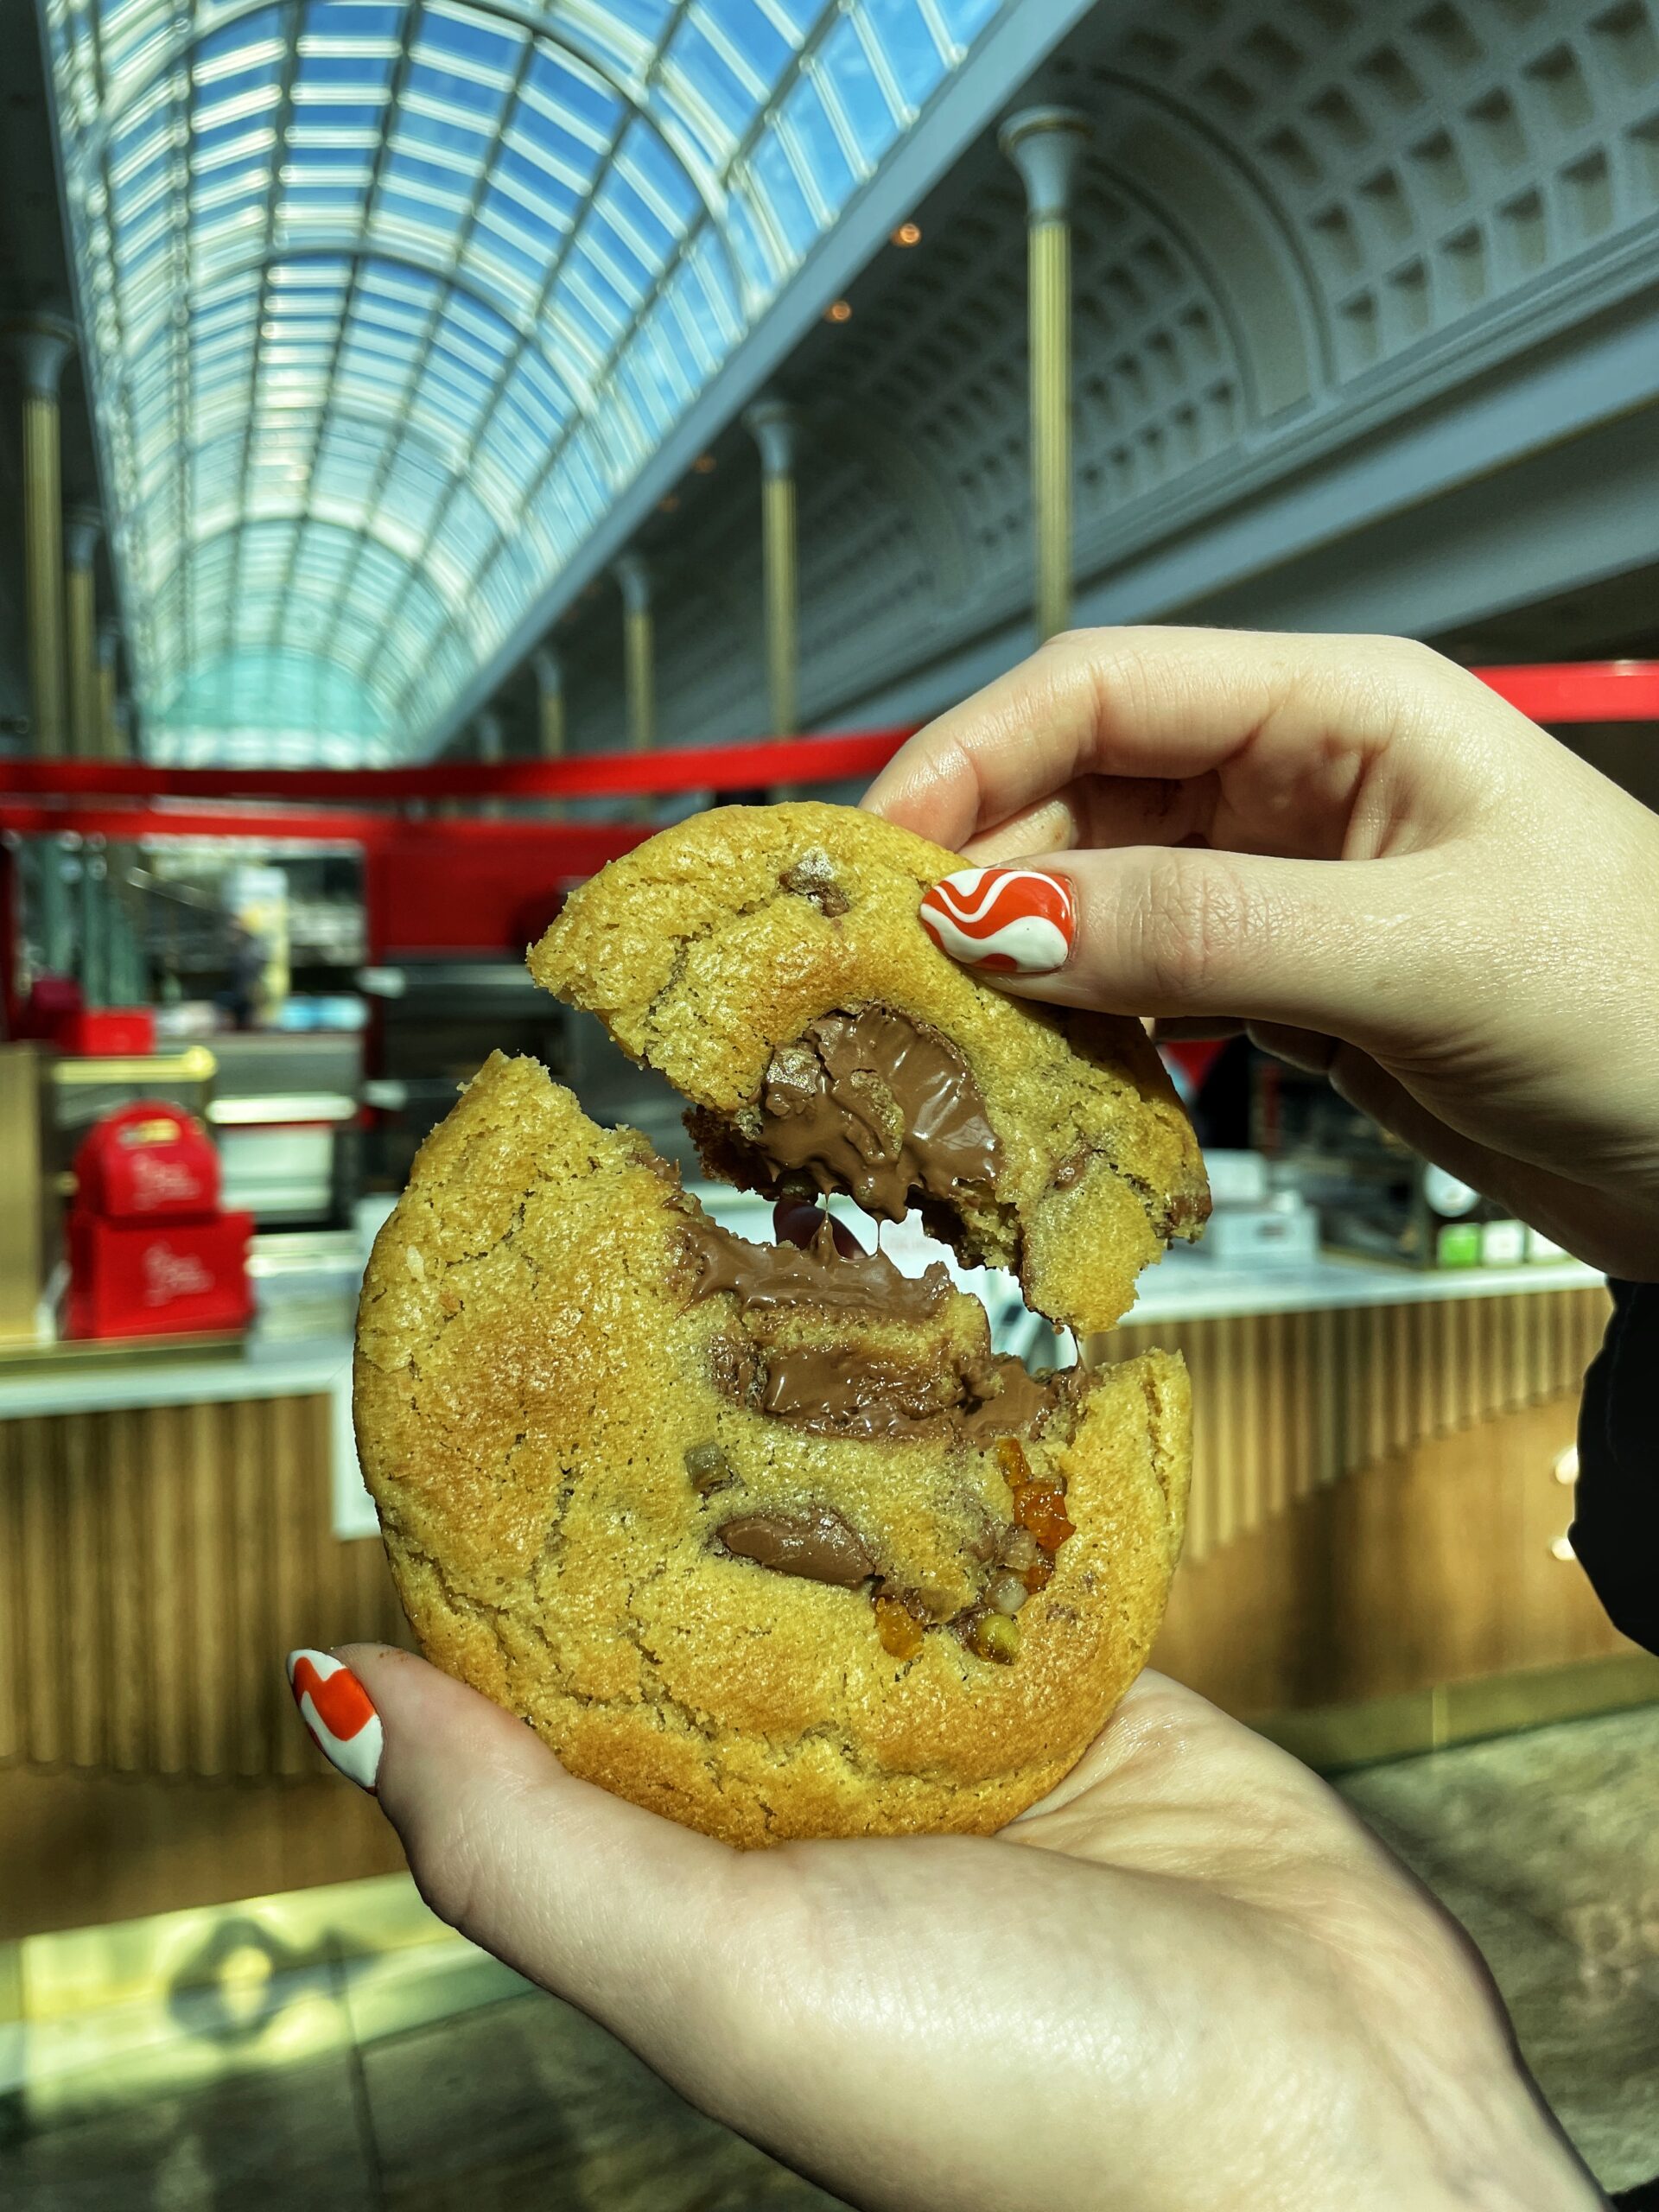 Ben's Cookies has opened at the Trafford Centre in Greater Manchester